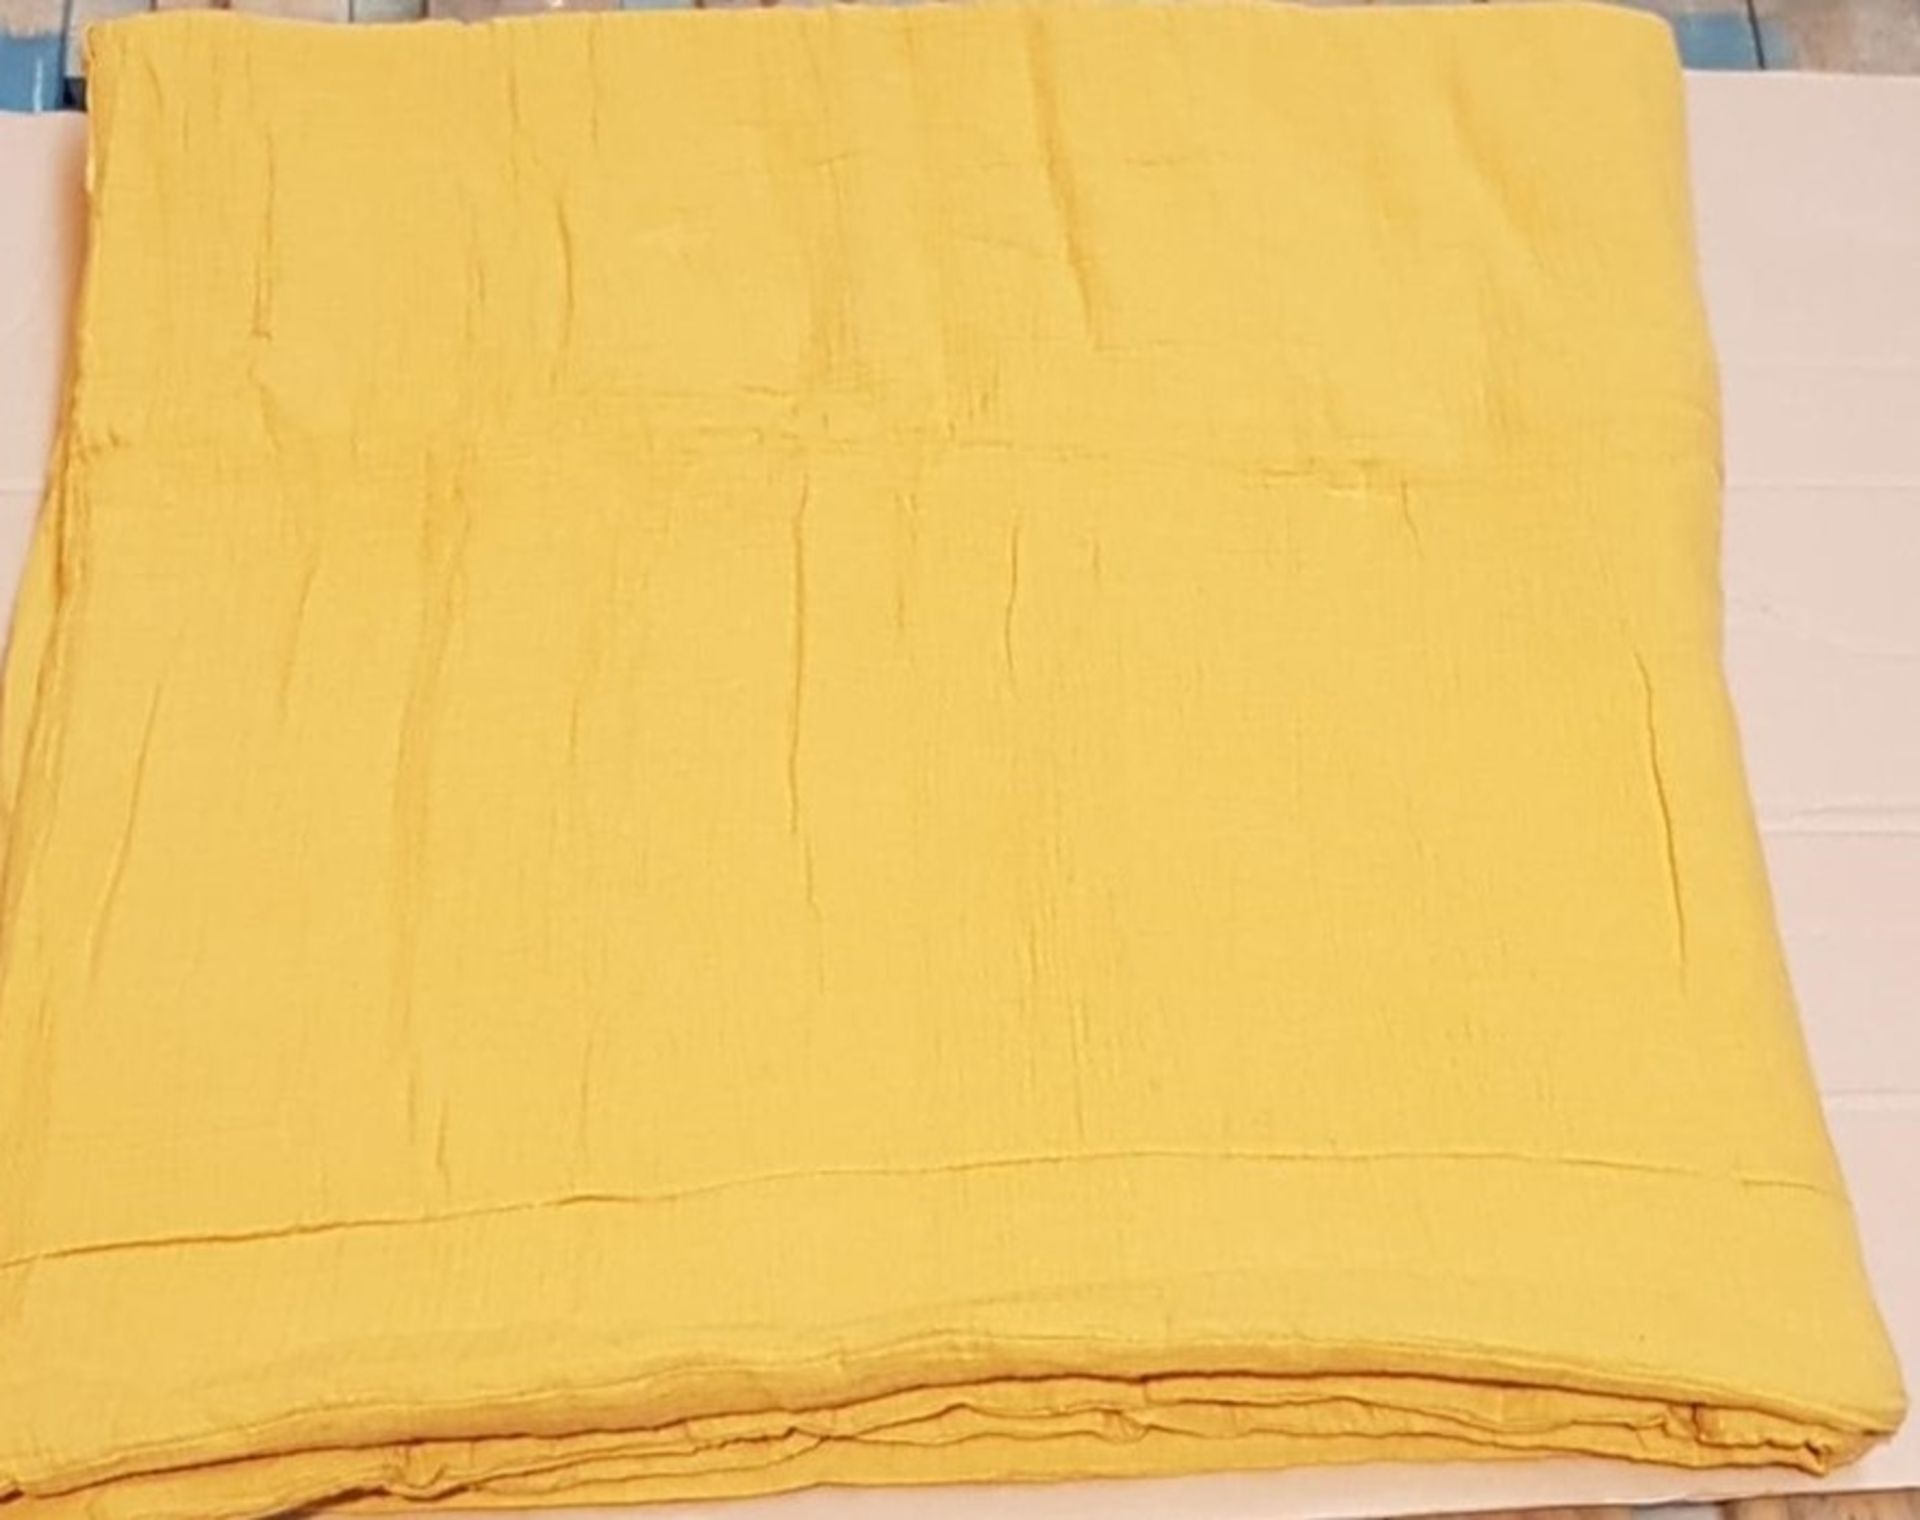 1 LA REDOUTE MUSTARD YELLOW BED THROW WITH TASSELS, APPROX 150 X 150CM (VIEWING HIGHLY RECOMMENDED)